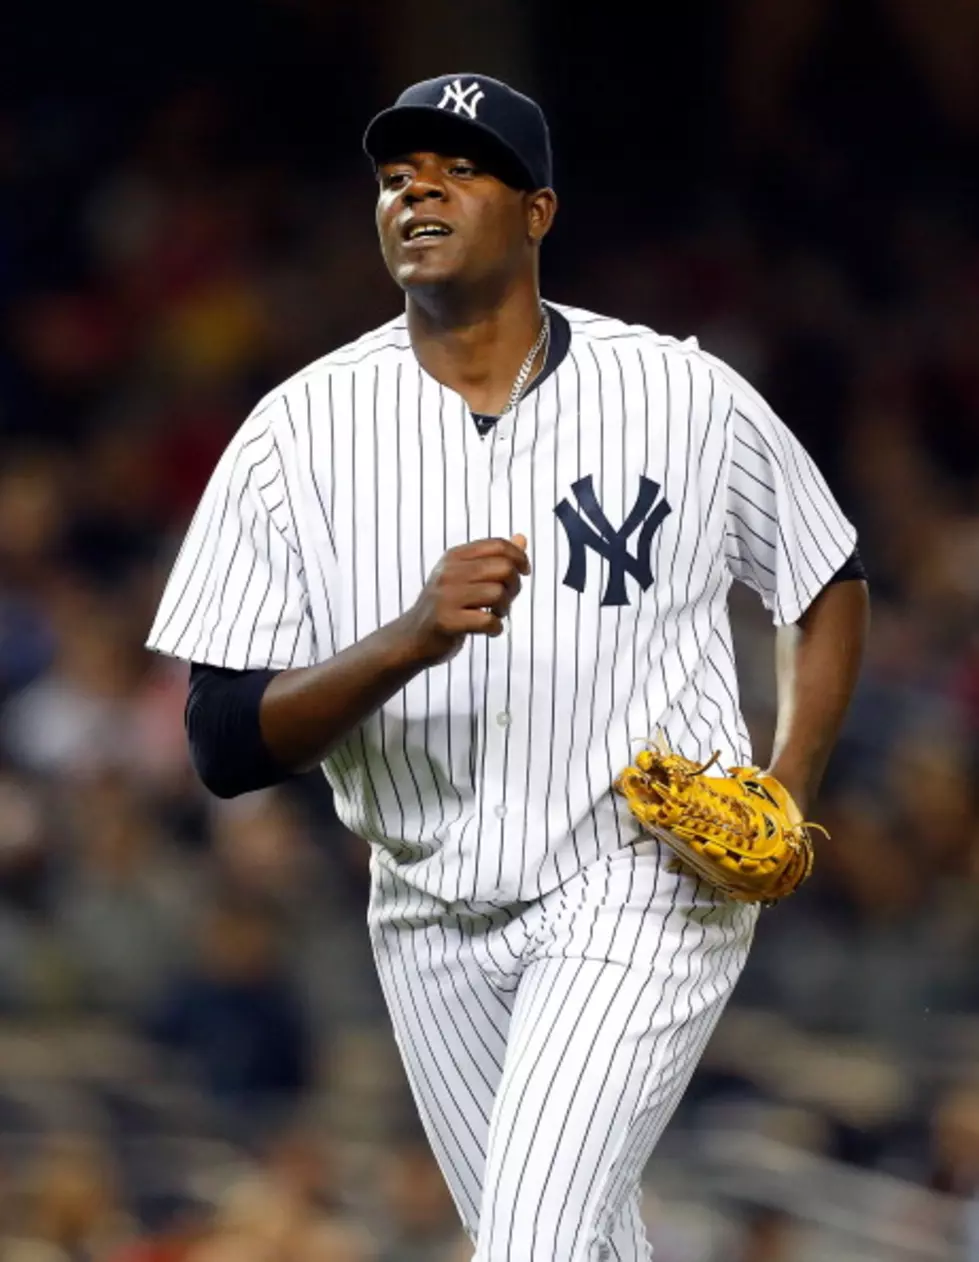 Big Mike And The Yankees Versus The Mariners [PREVIEW]